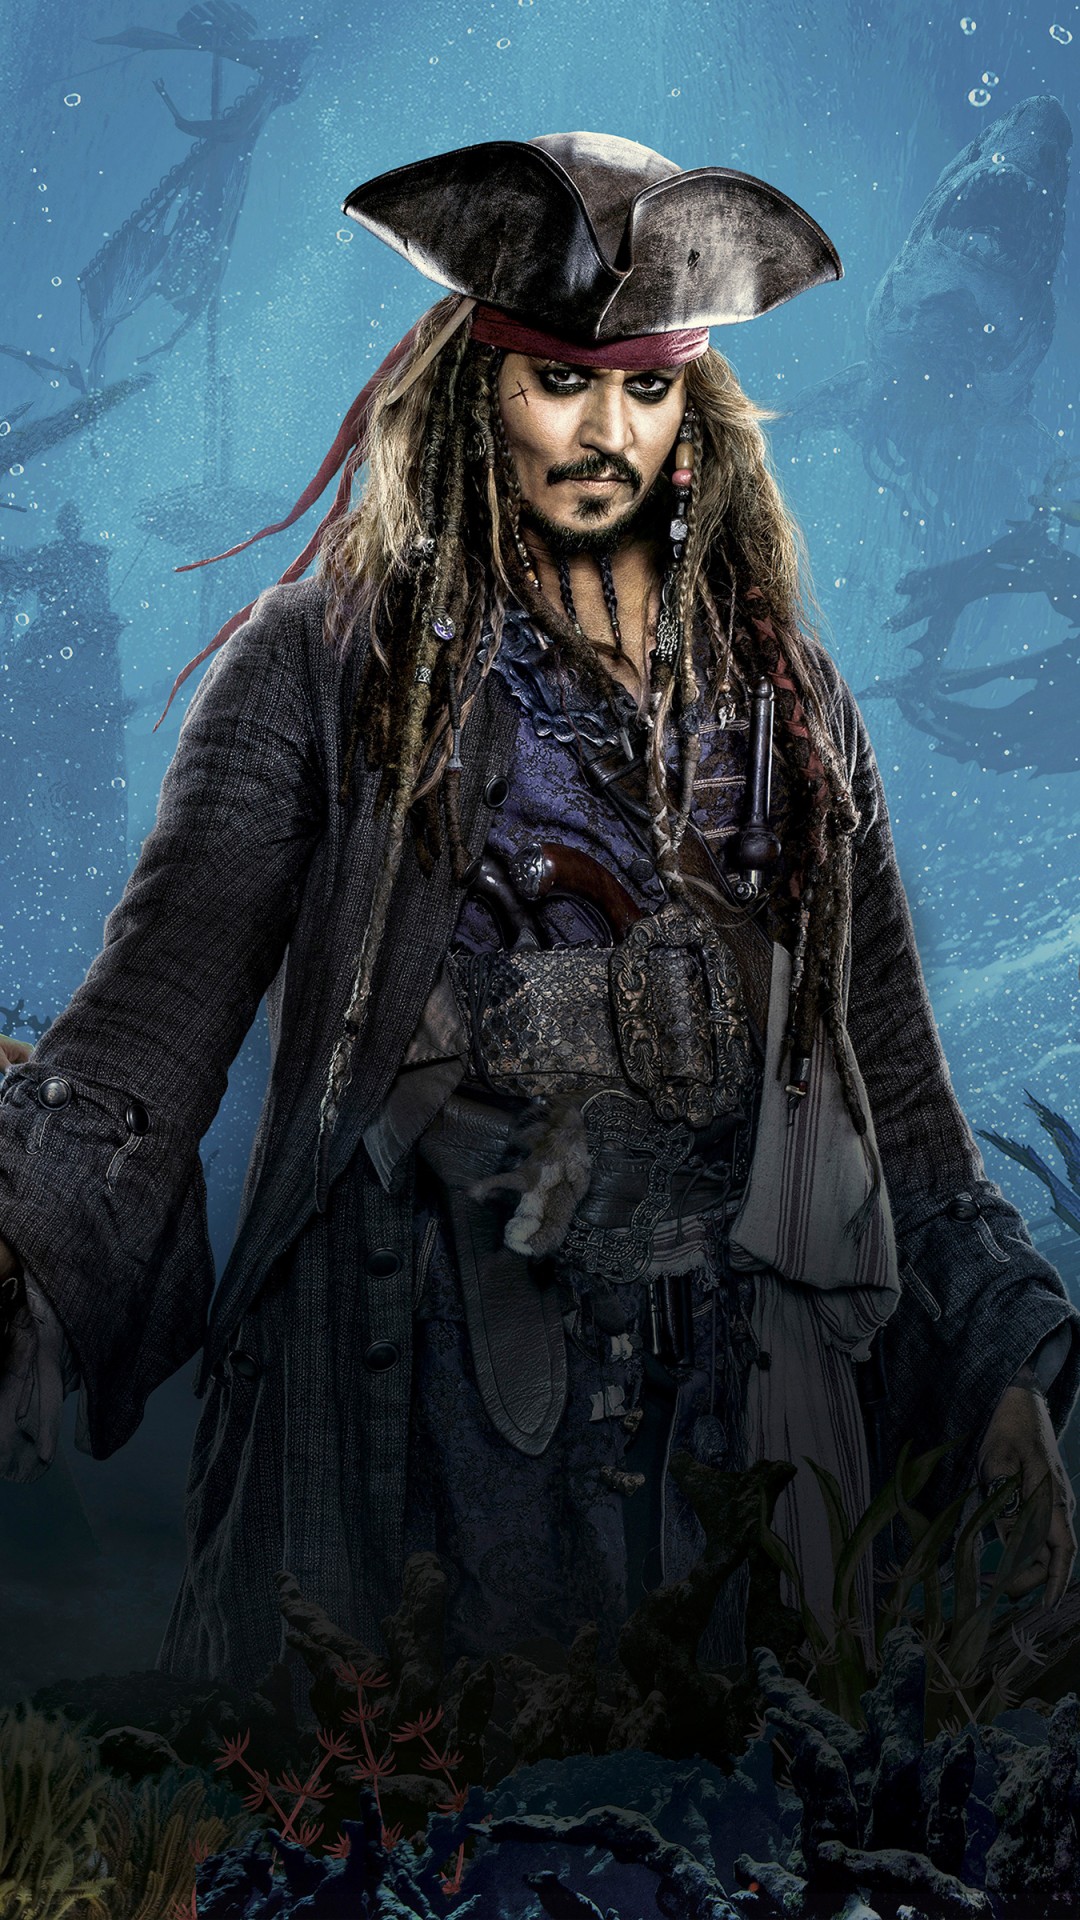 Pirates Of The Caribbean Dead Men Tell No Tales 4k iPhone 6 Plus Hot Desktop and background for your PC and mobile